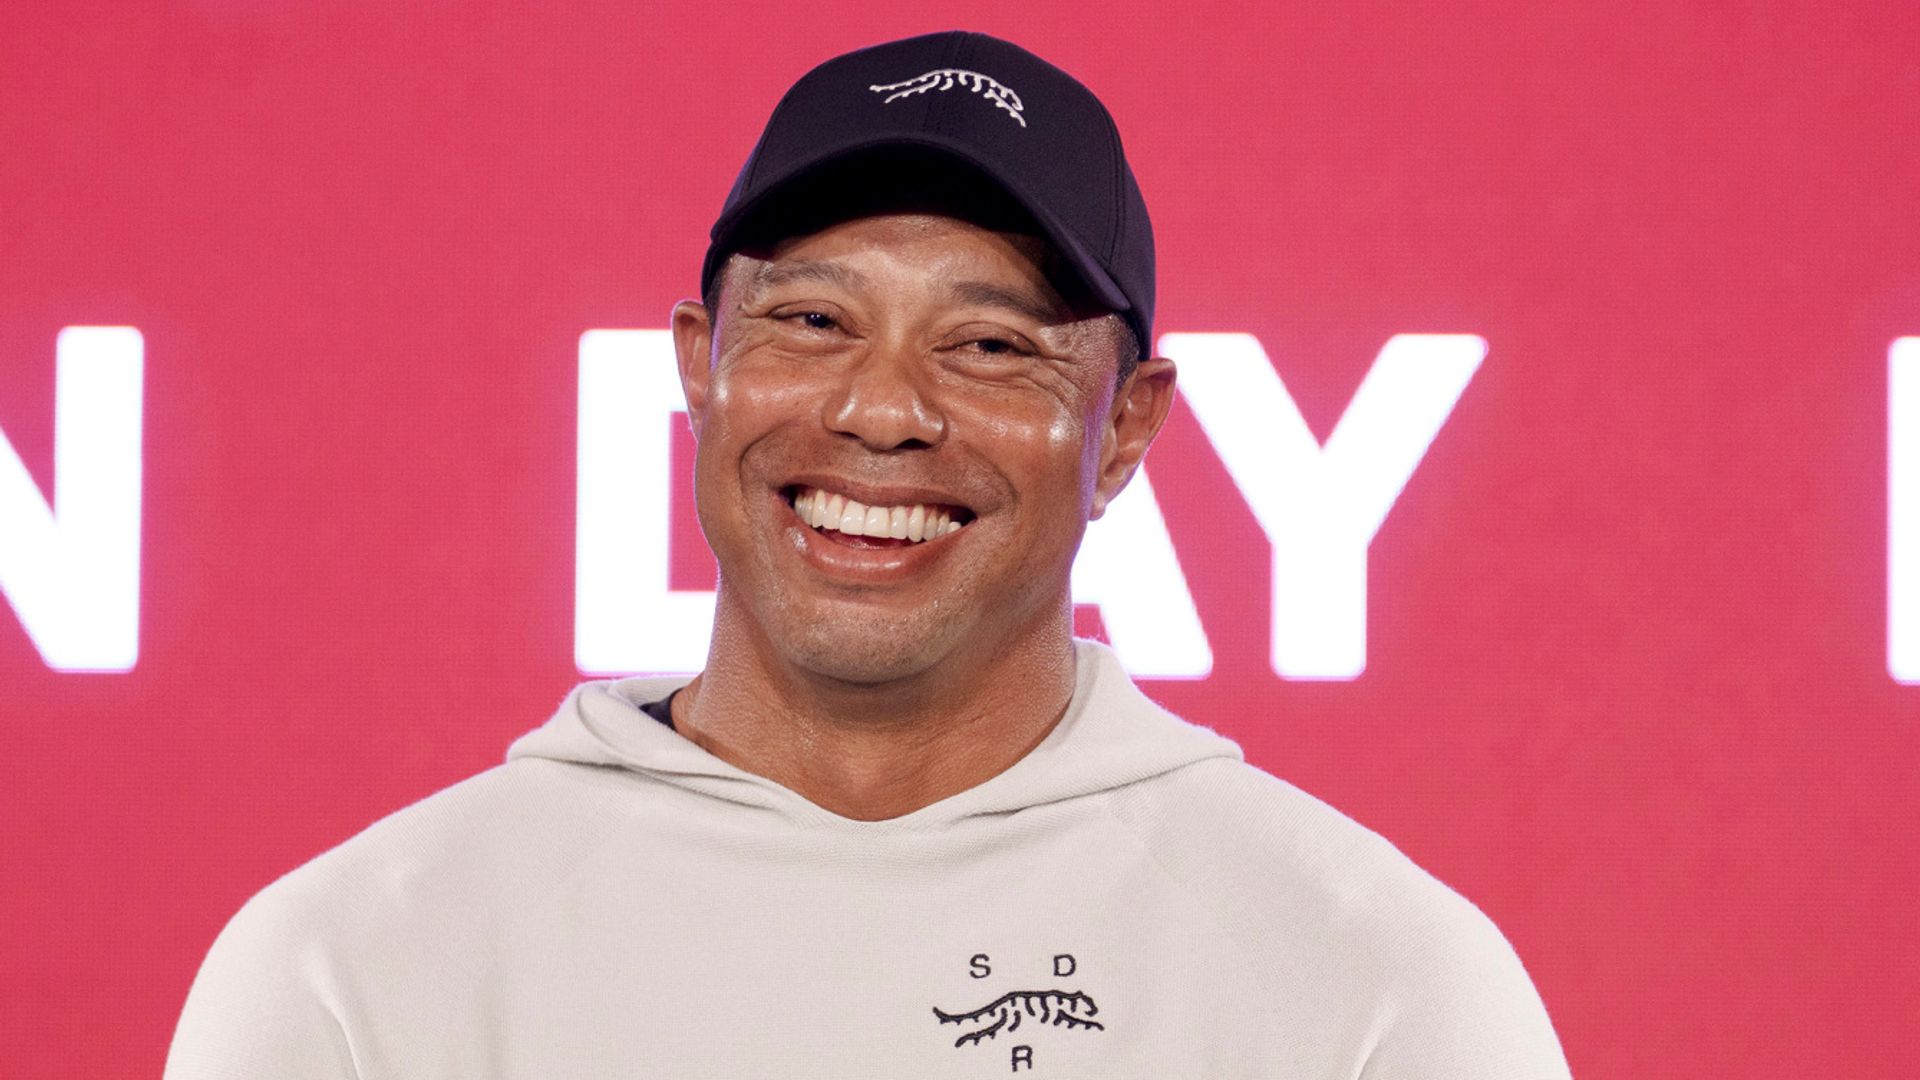 Tiger launches new 'Sun Day Red' brand after split with Nike